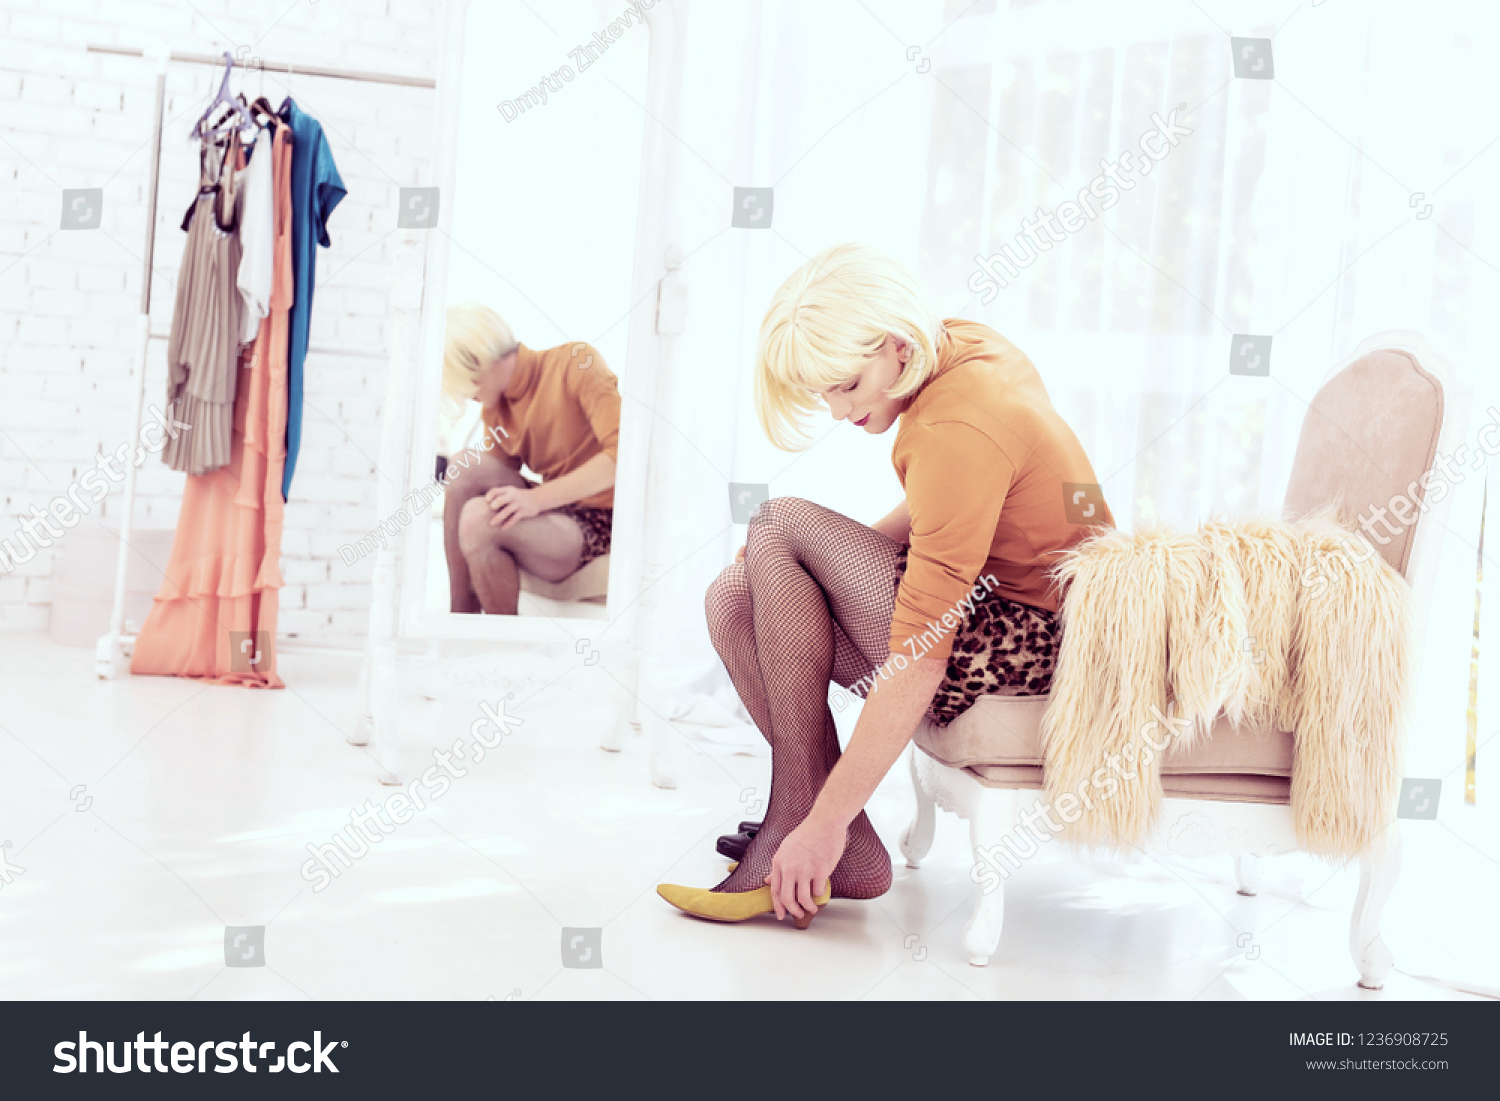 Blond Short Wig Fit Young Crossdresser Stock Photo Edit Now